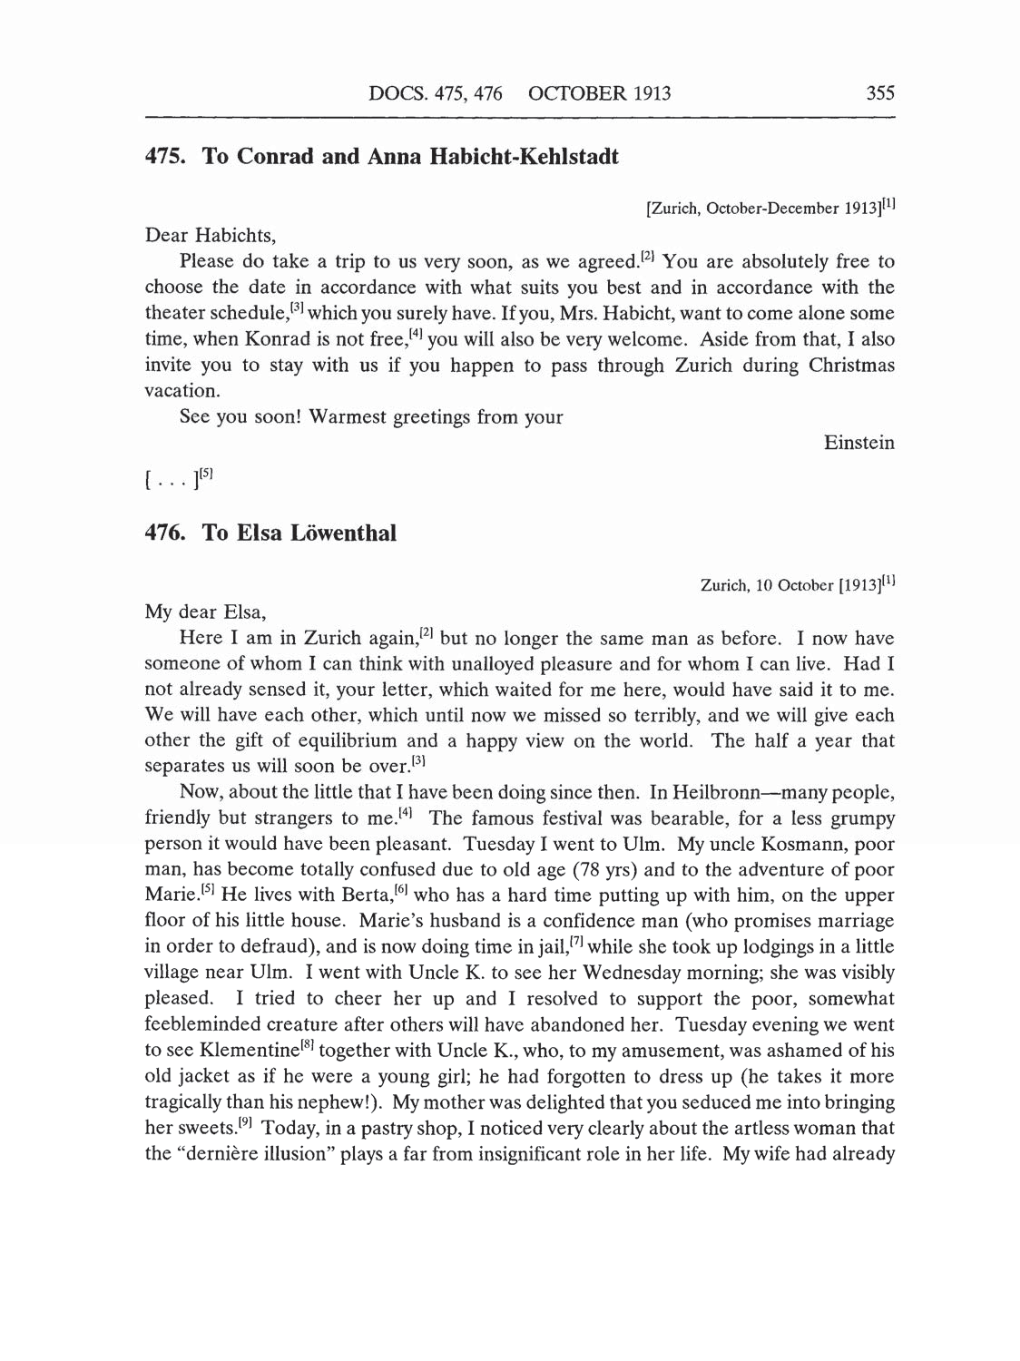 Volume 5: The Swiss Years: Correspondence, 1902-1914 (English translation supplement) page 355